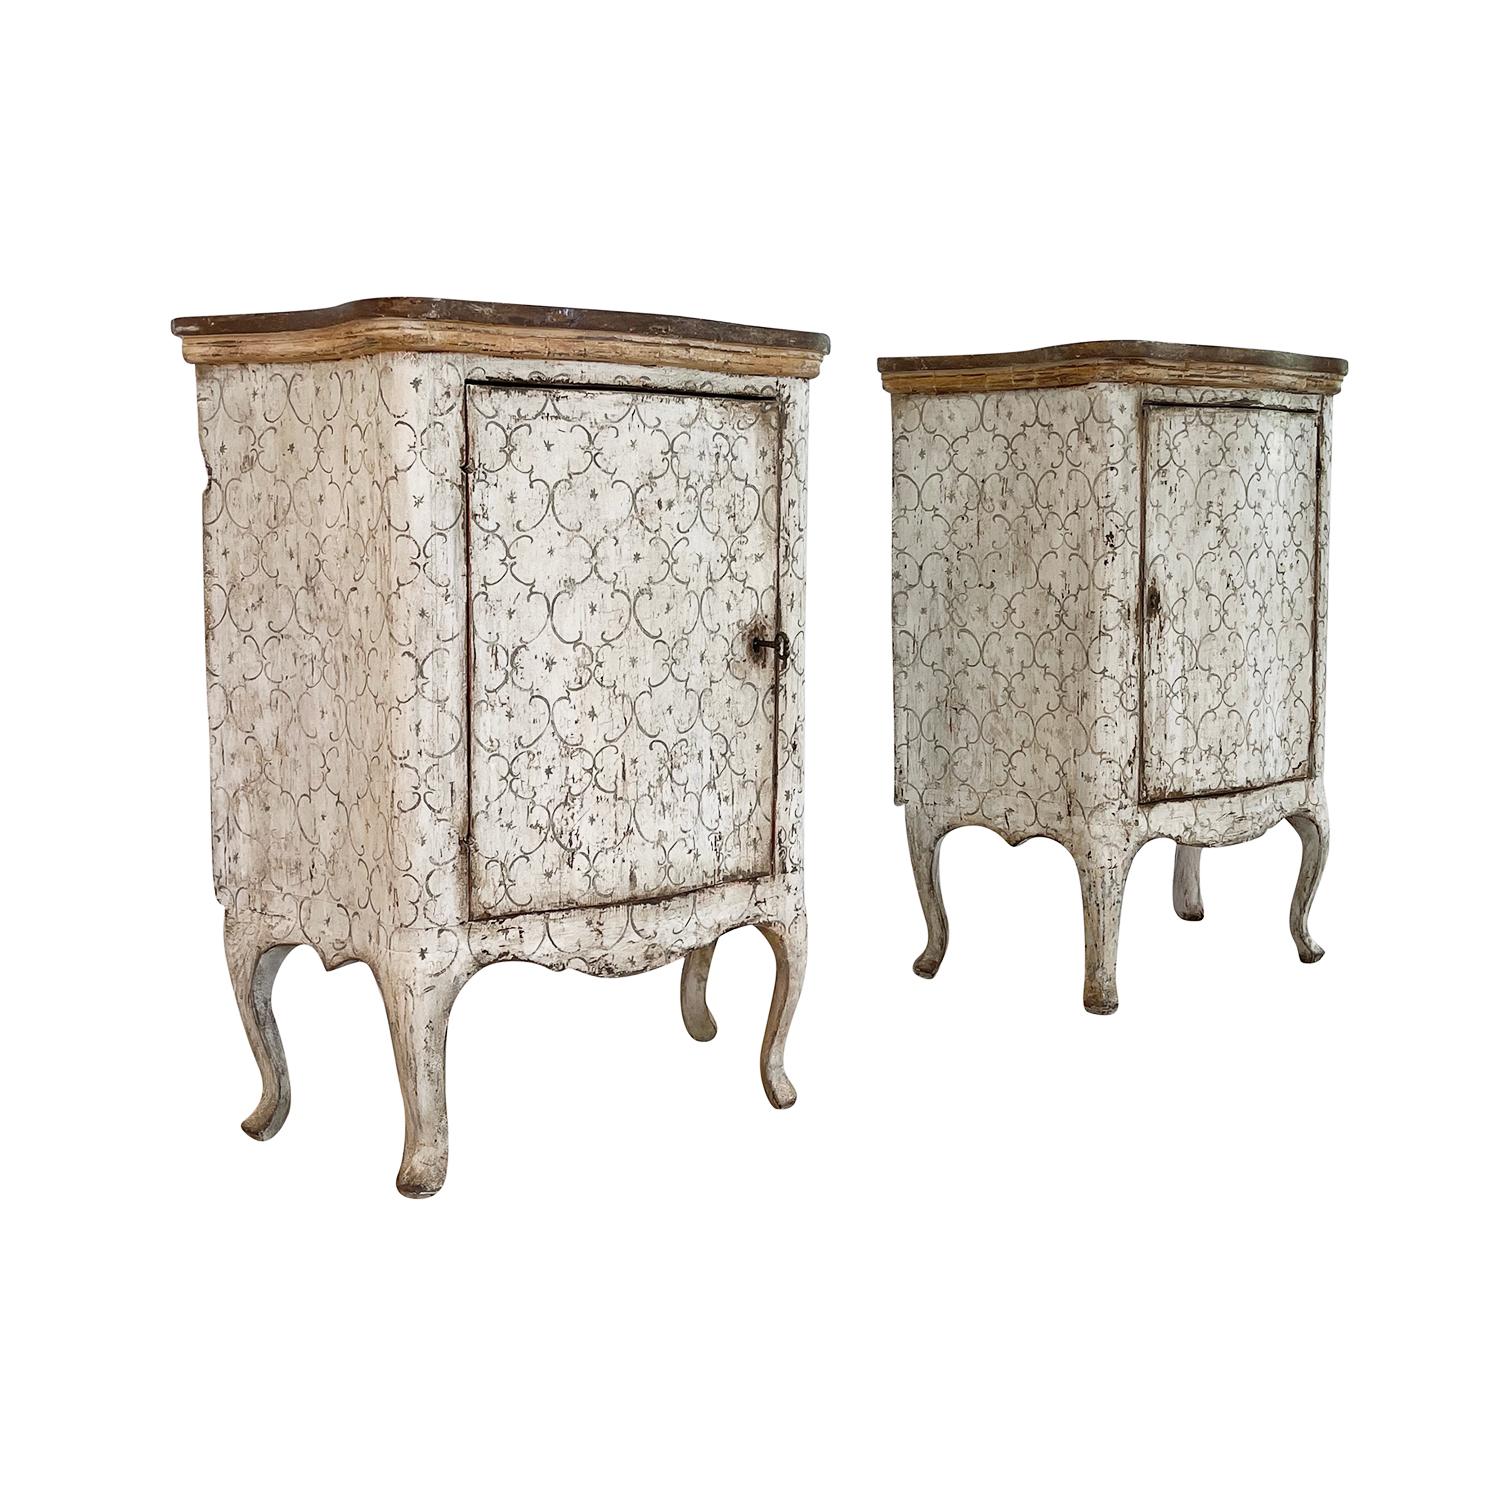 19th Century Italian Pair of Antique Louis XIV Pinewood Cabinets Arte Povera In Good Condition For Sale In West Palm Beach, FL